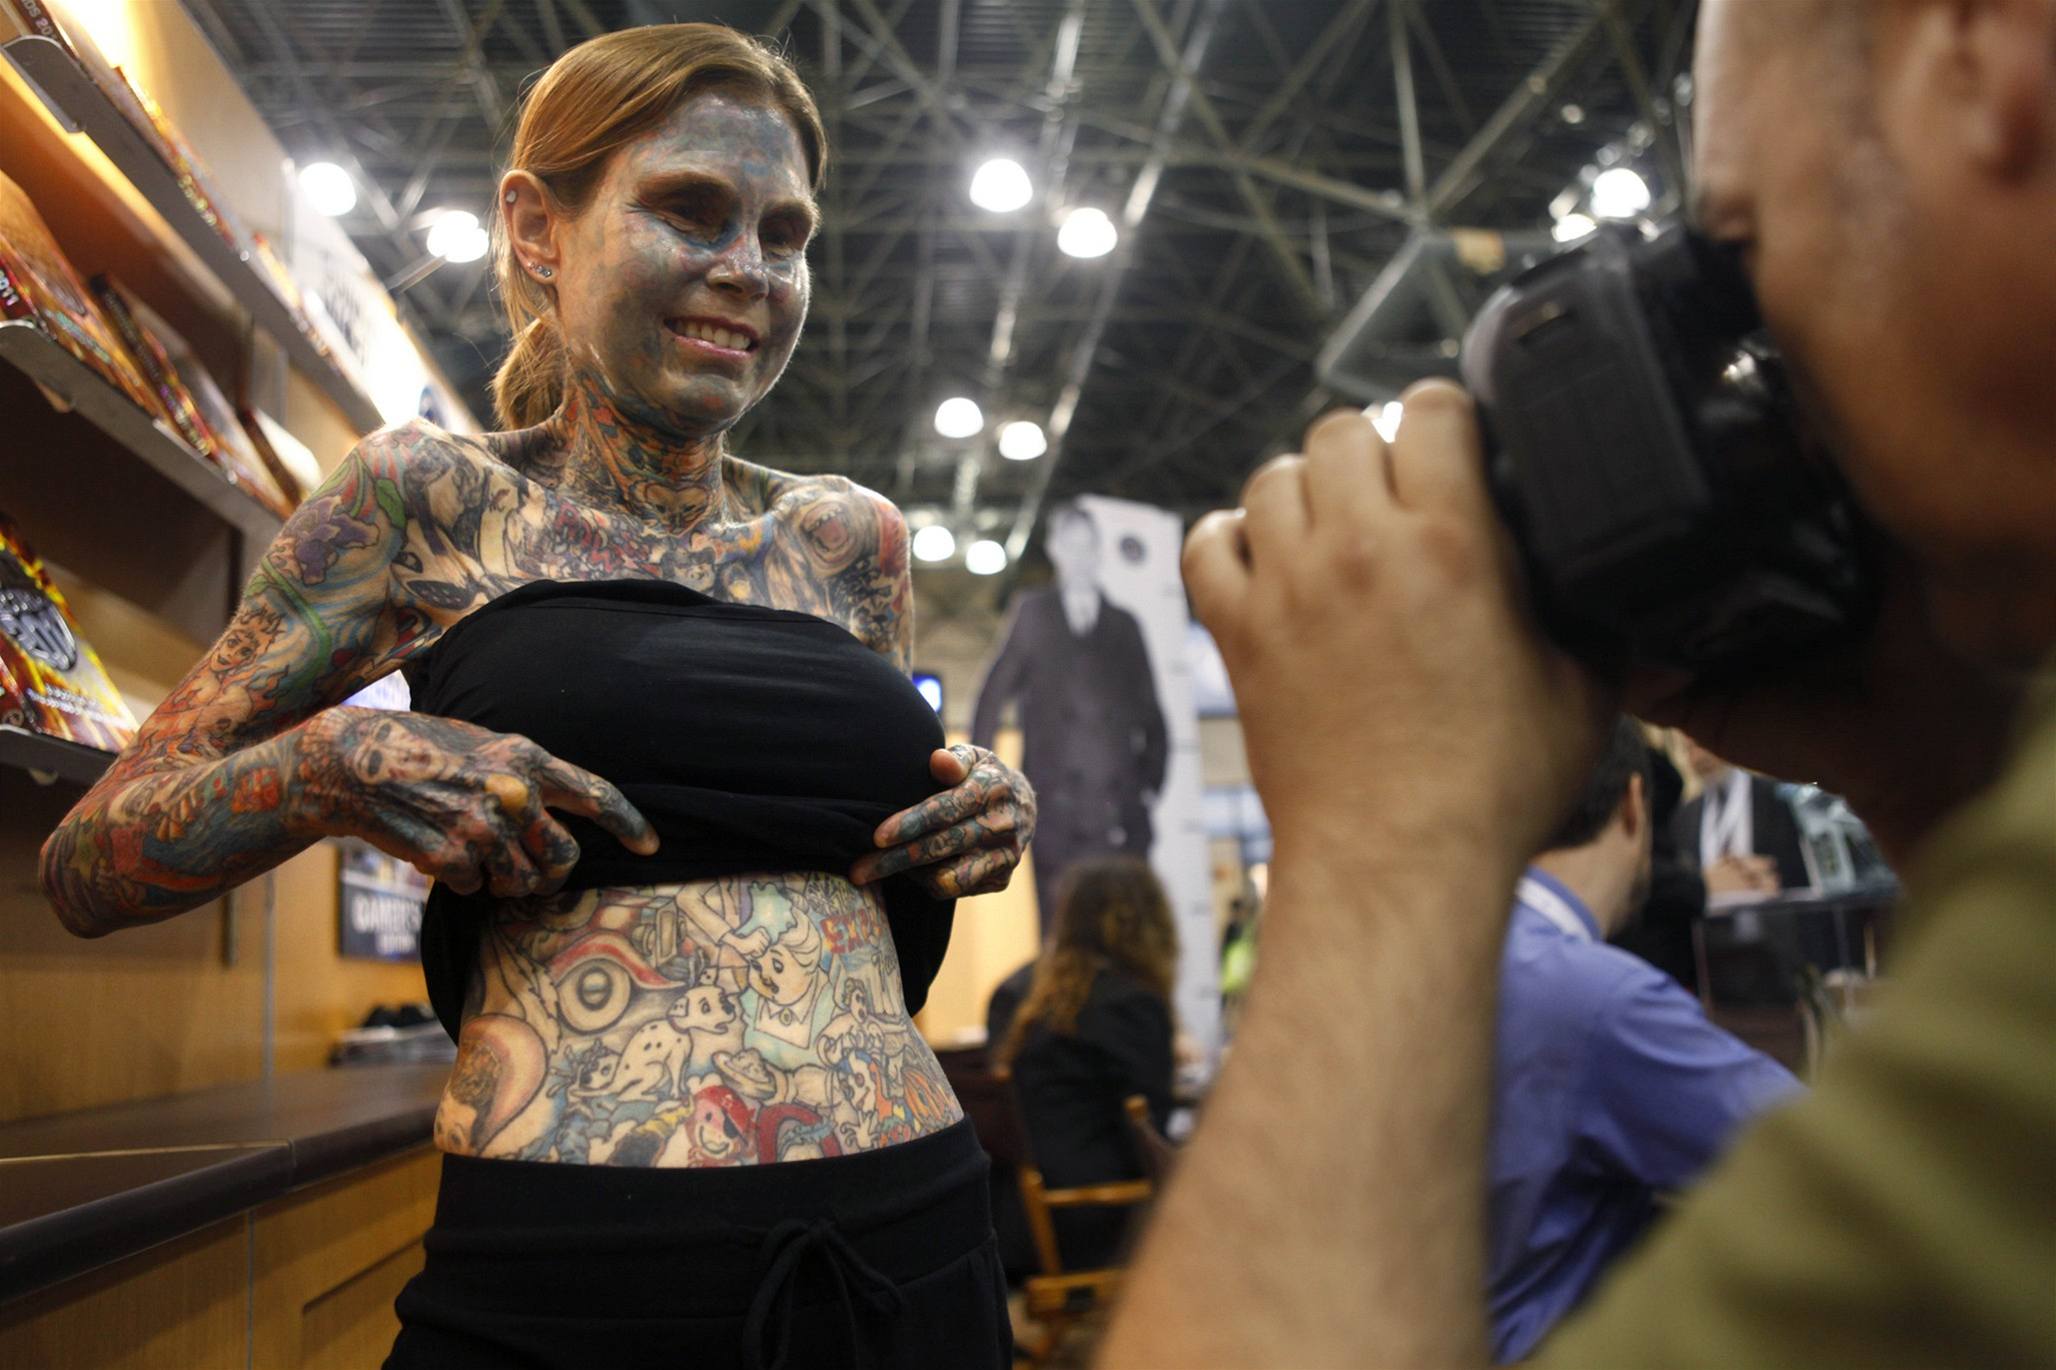 Tattooed britains woman most ‘Britain’s most